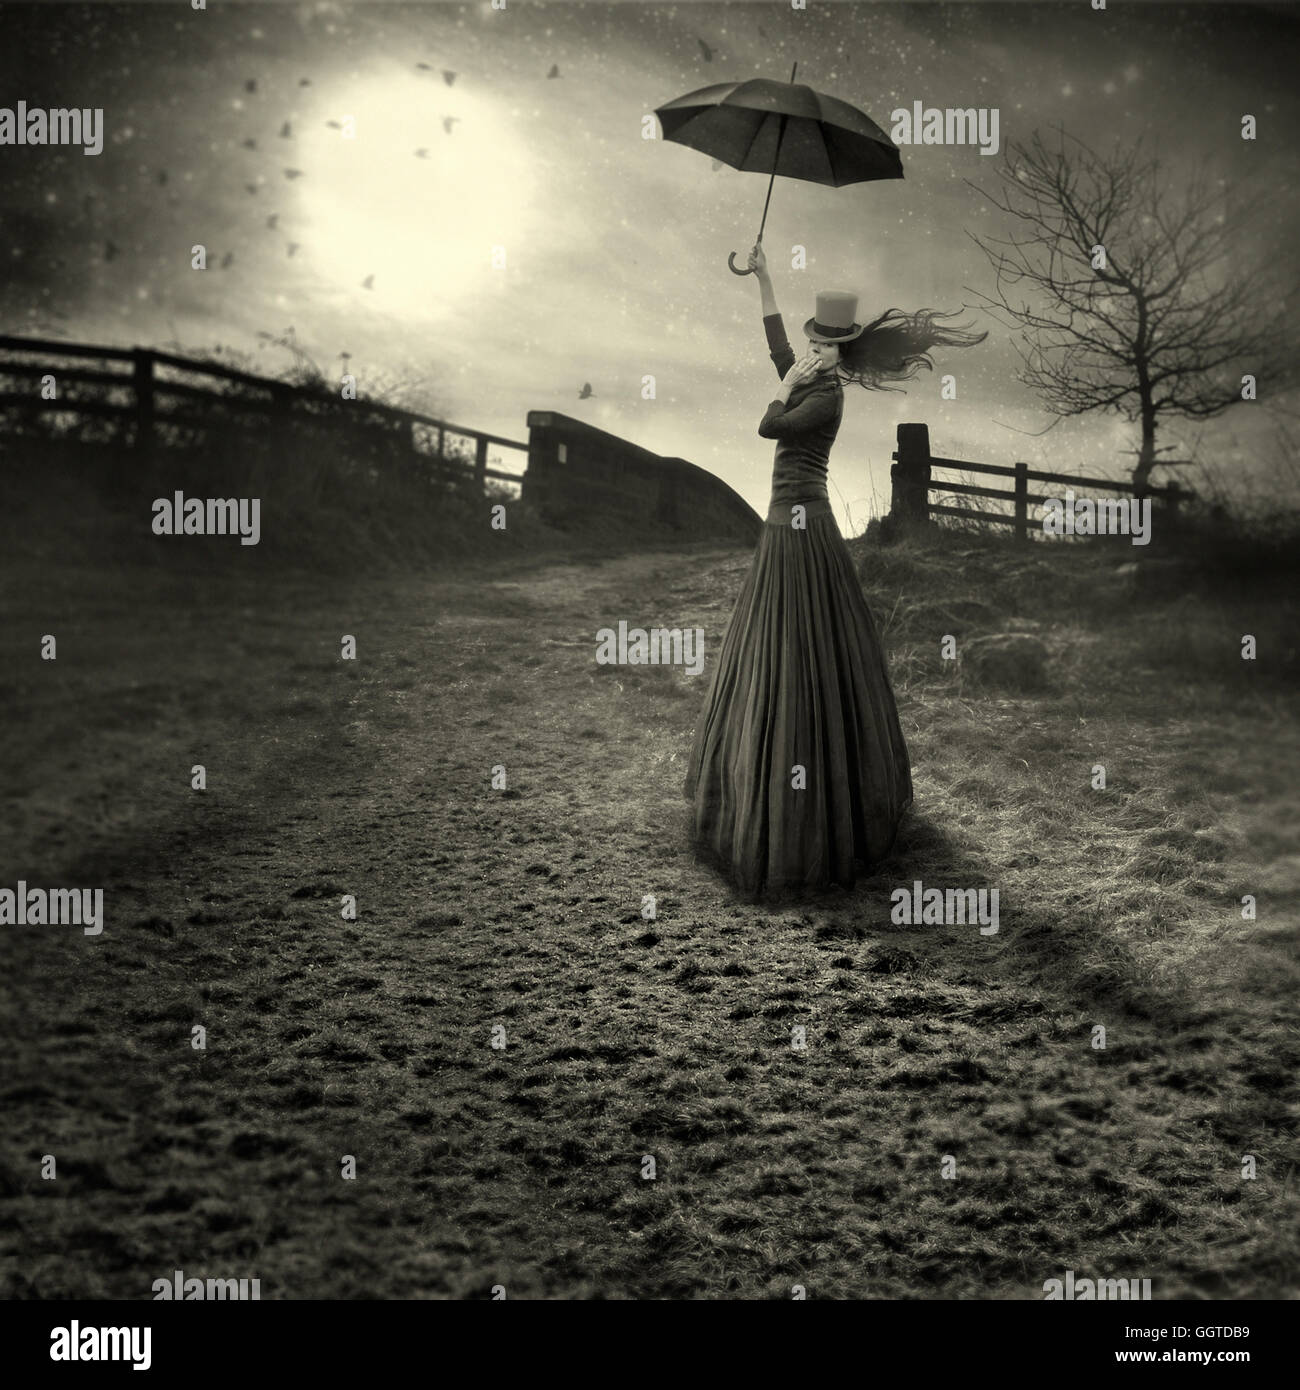 young woman like marry Poppins  with umbrella standing in fields Stock Photo